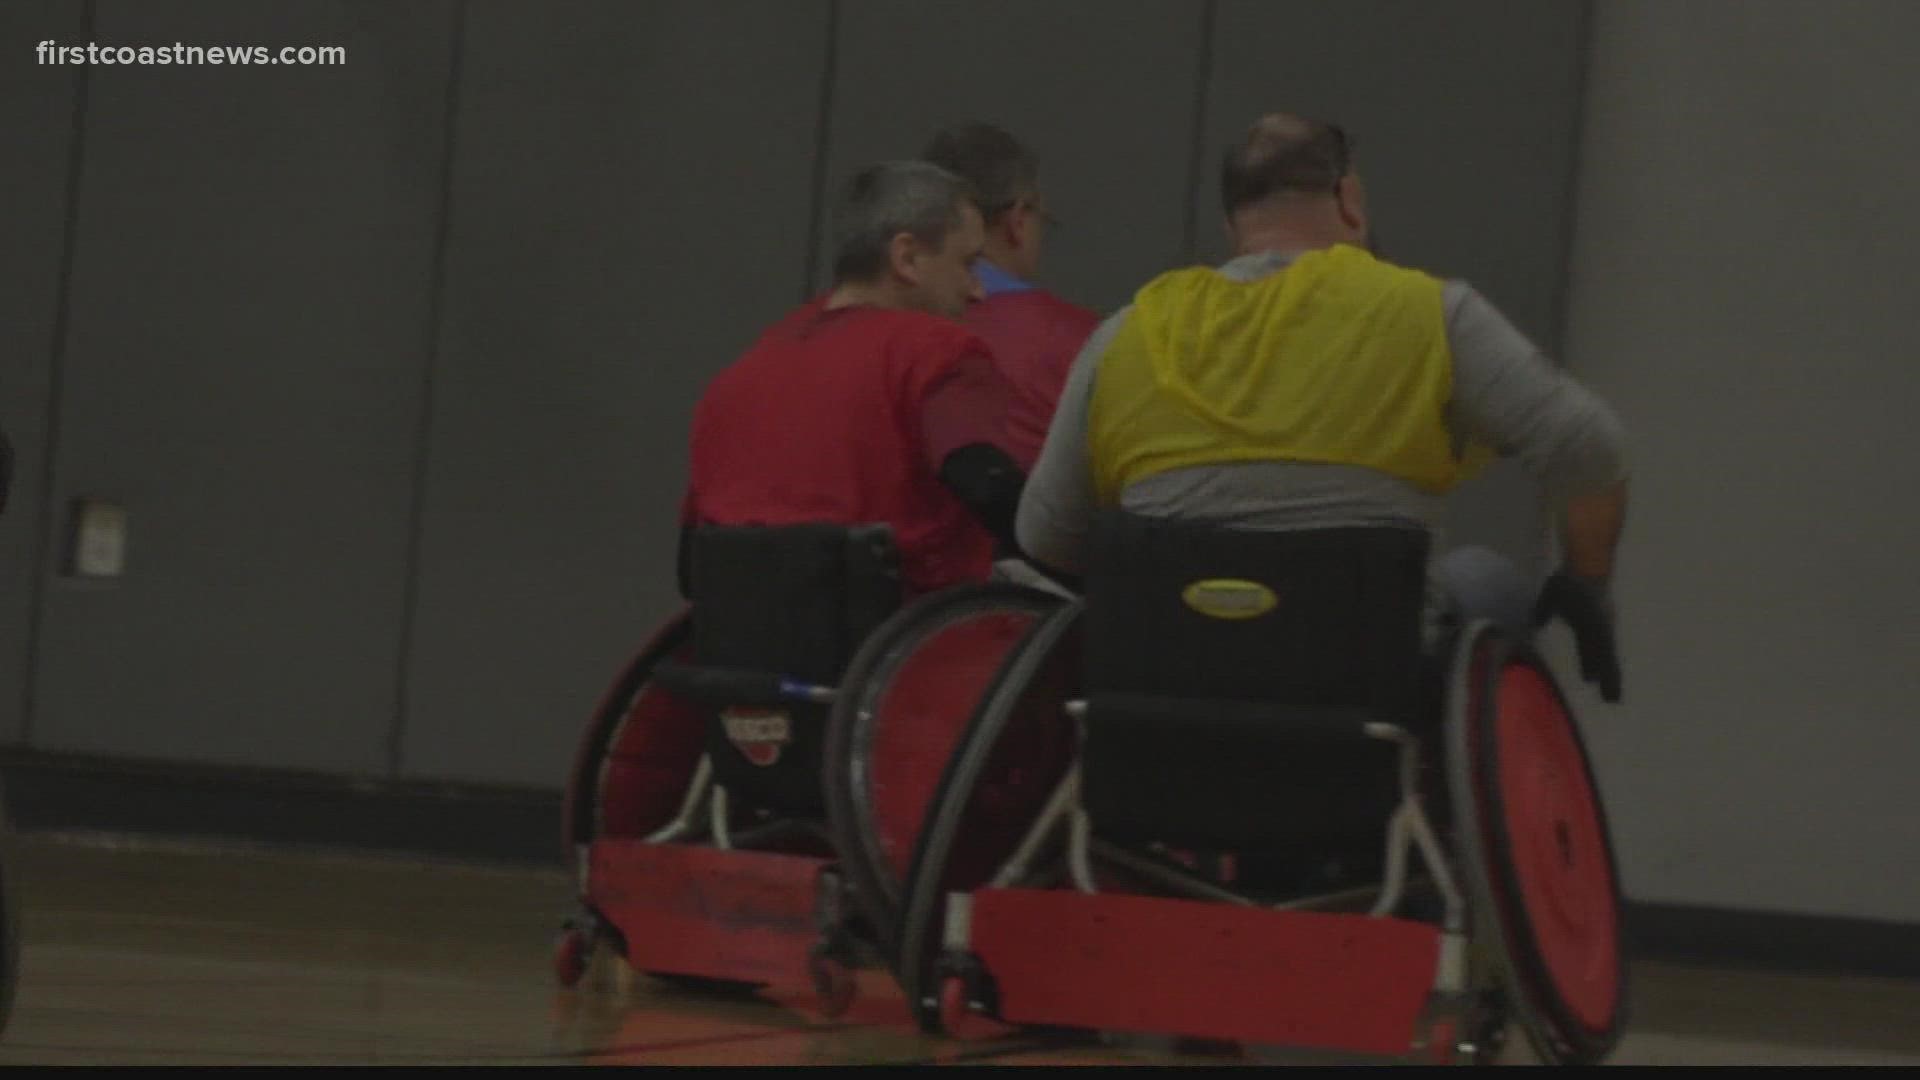 Members of Wounded Warrior Project participate in wheelchair rugby.